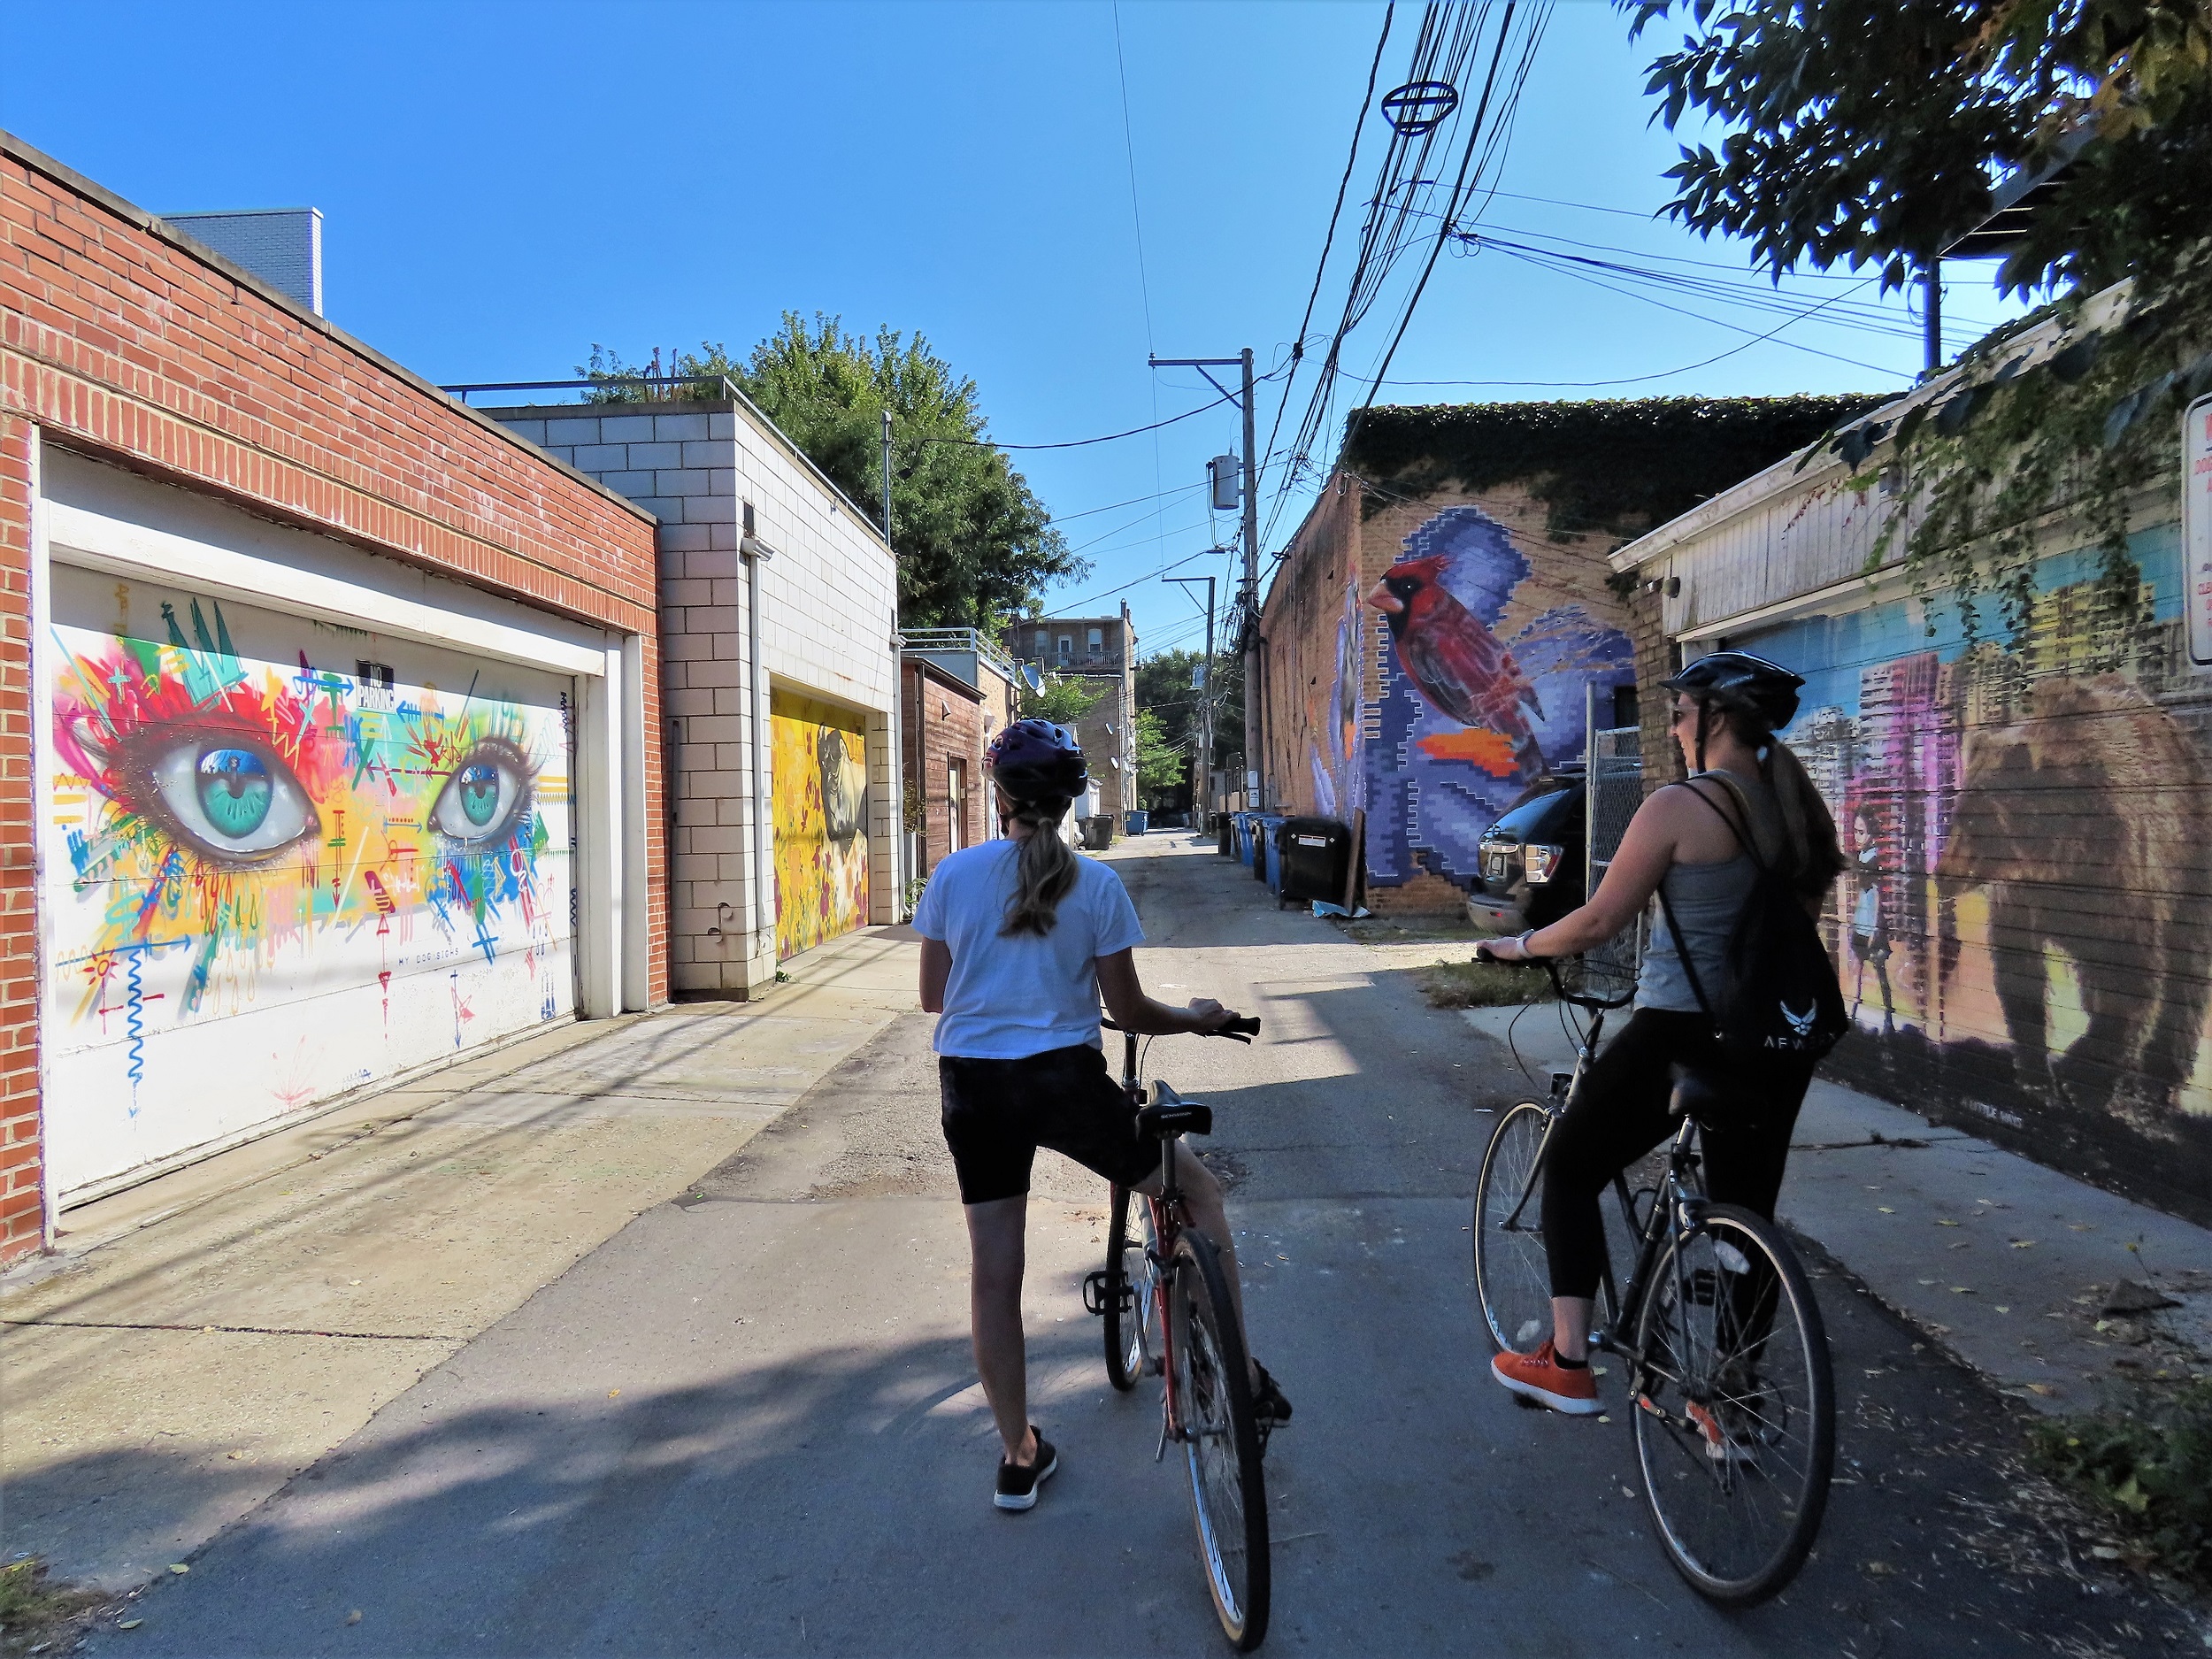 Two CBA riders from behind looking at an alley with garage doors covered in murals.